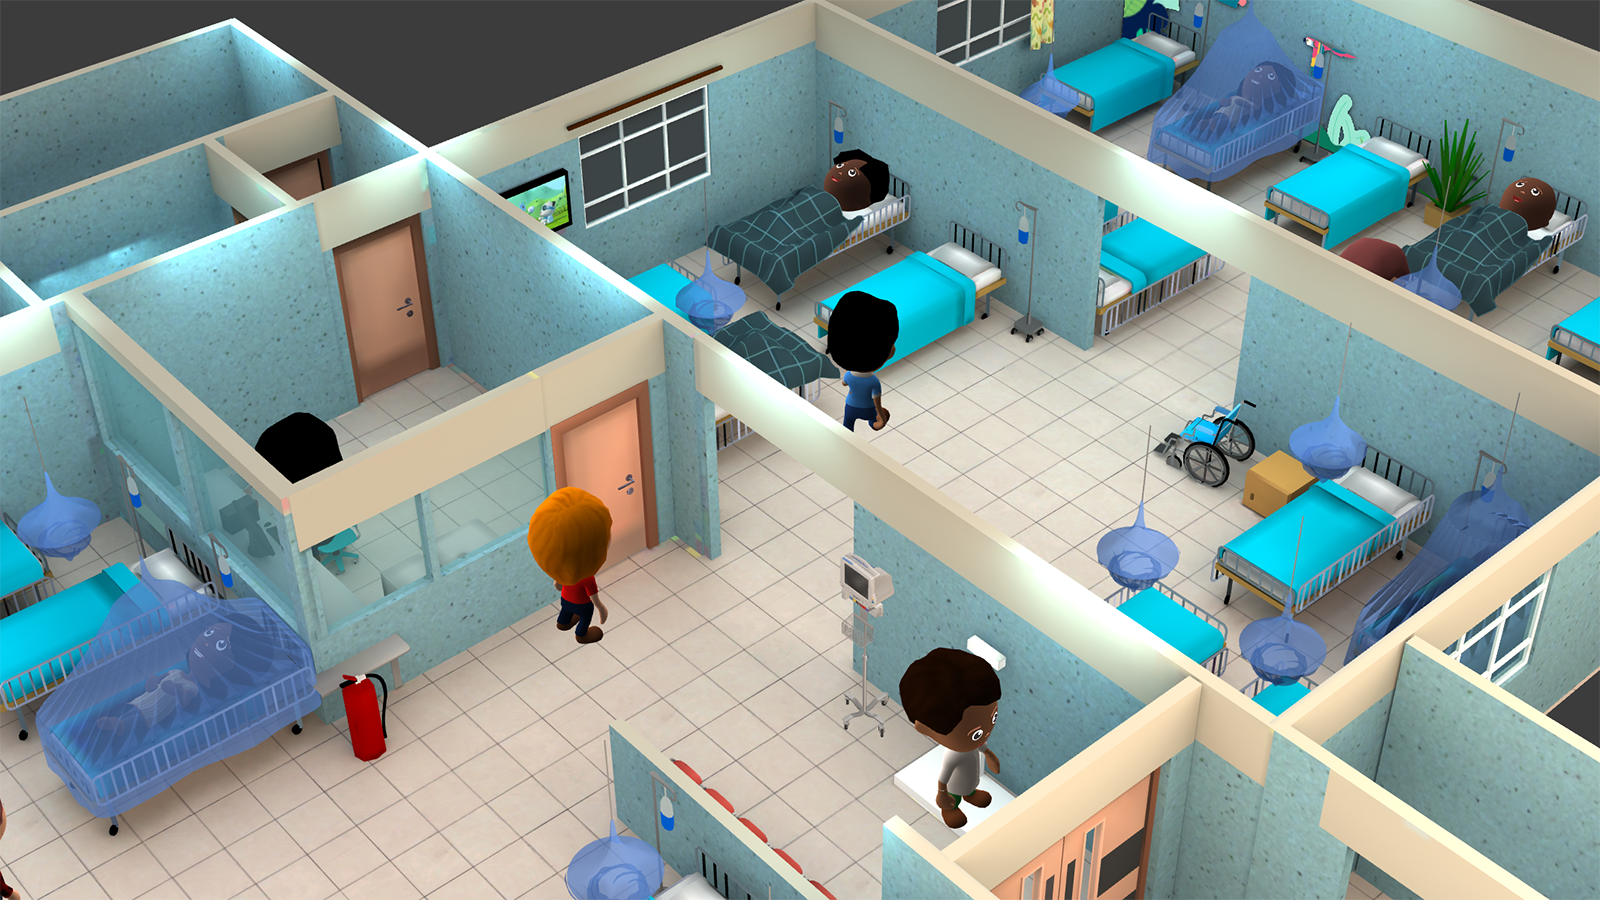 3D interactive environment of a ward in Malawi